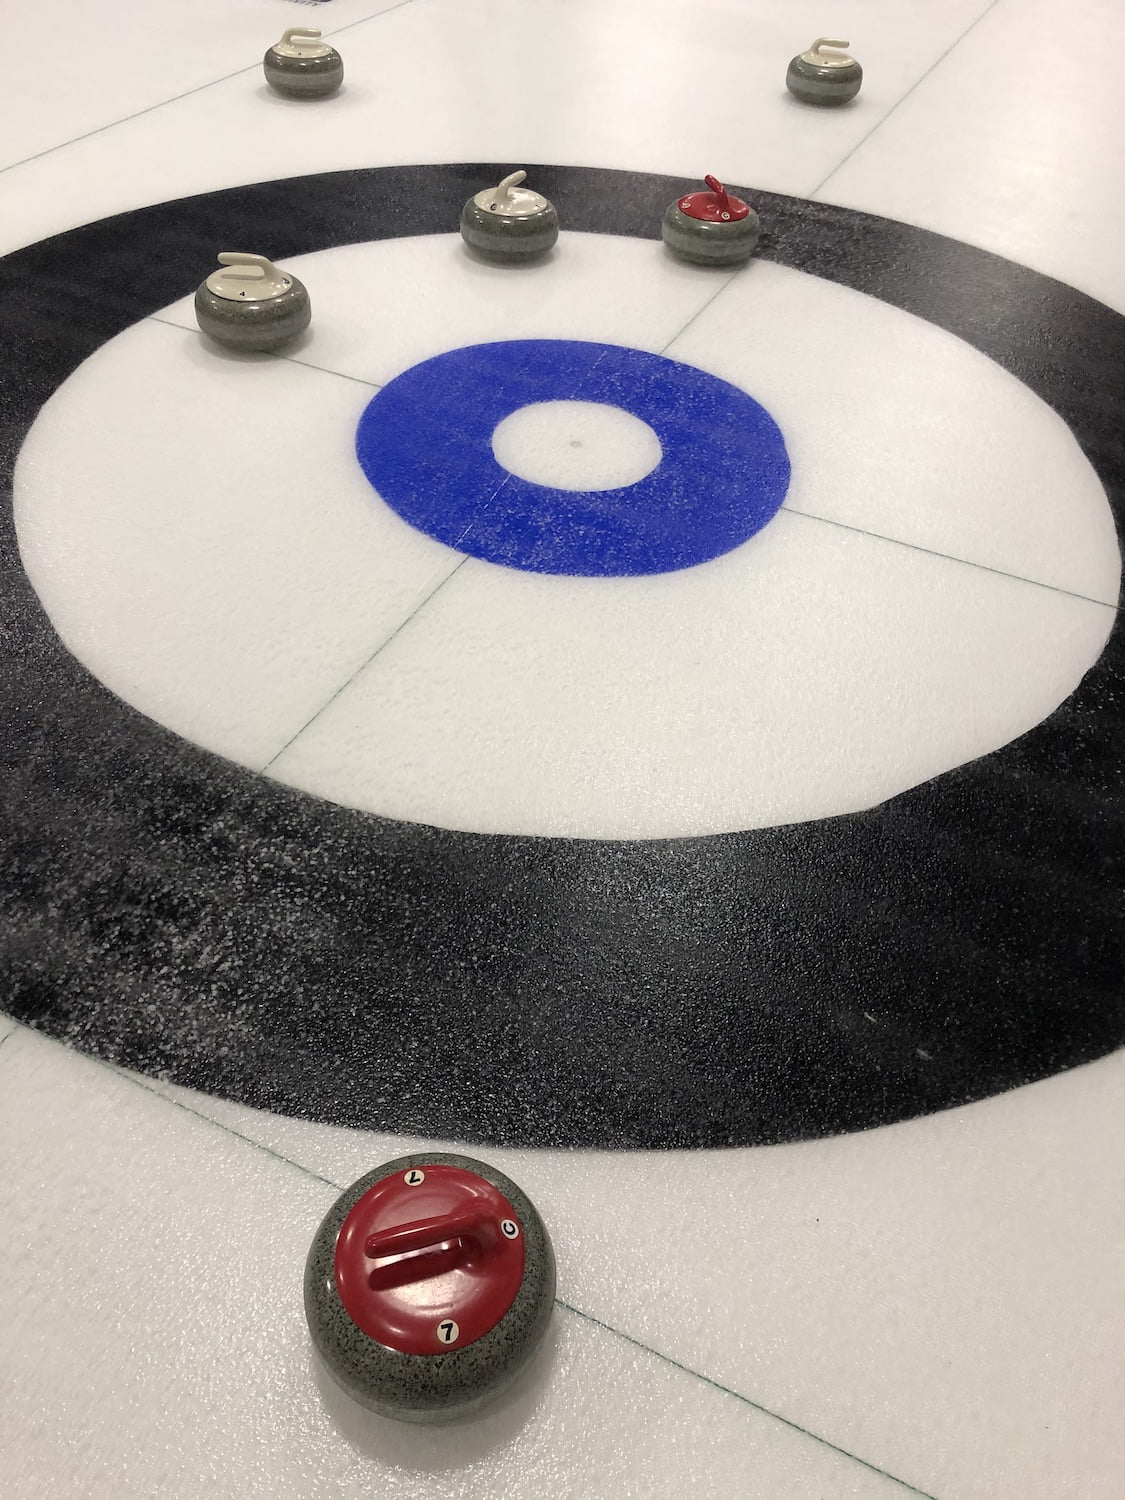 Curling Rocks in House on Rink